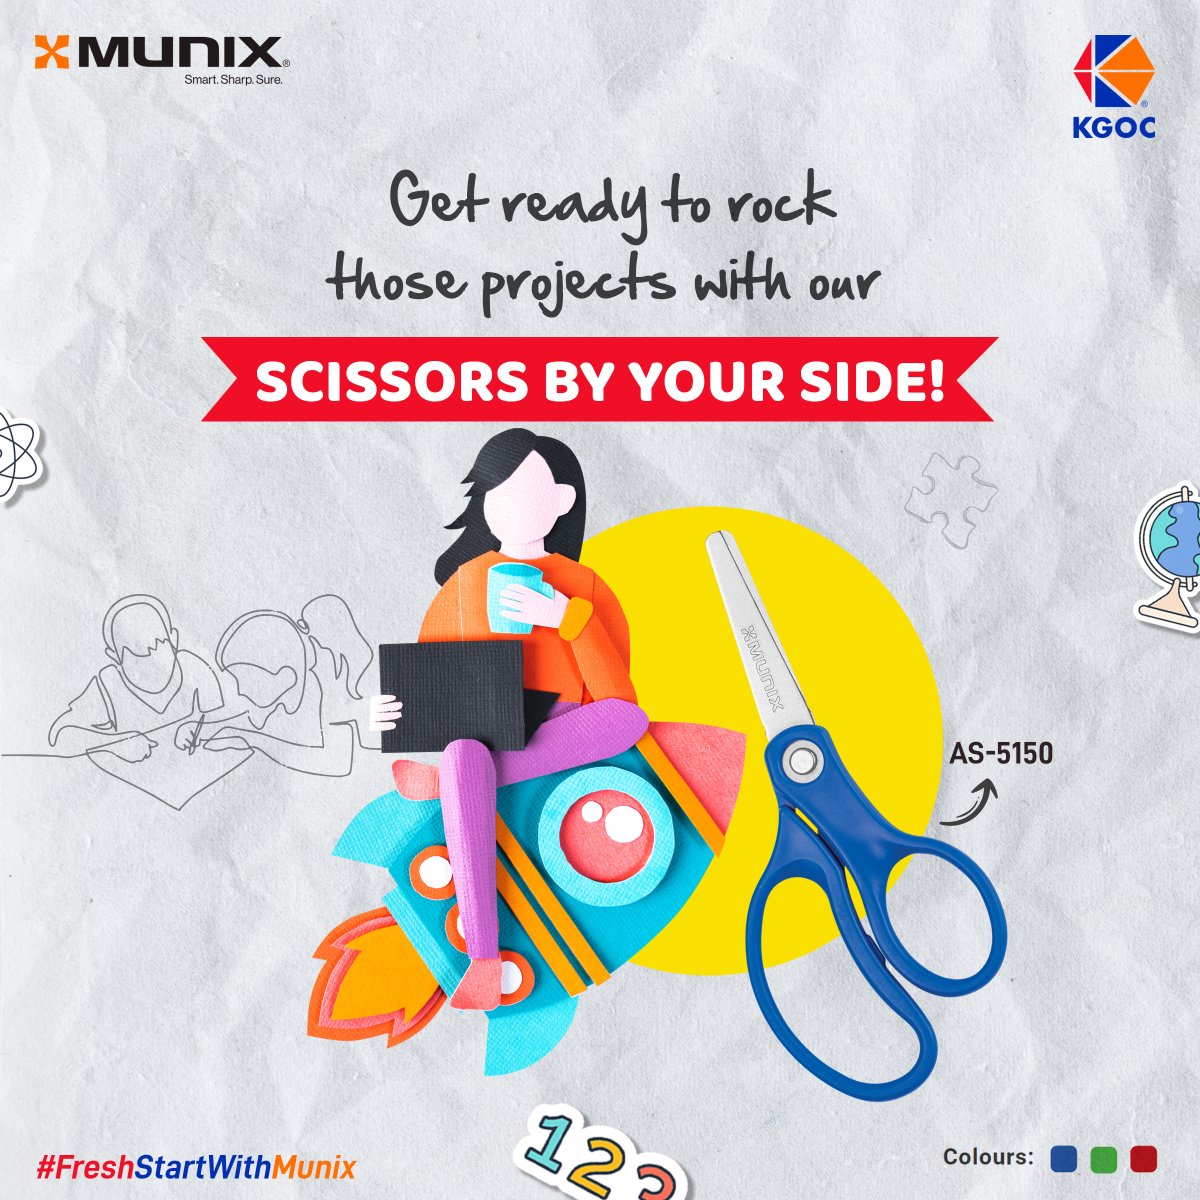 From paper crafts to masterpieces, we've got you covered. Let's turn your ideas into reality! 🌟

#munix #kgoc #MunixMagic #ProjectPro #CraftingEssentials #freshstartwithmunix